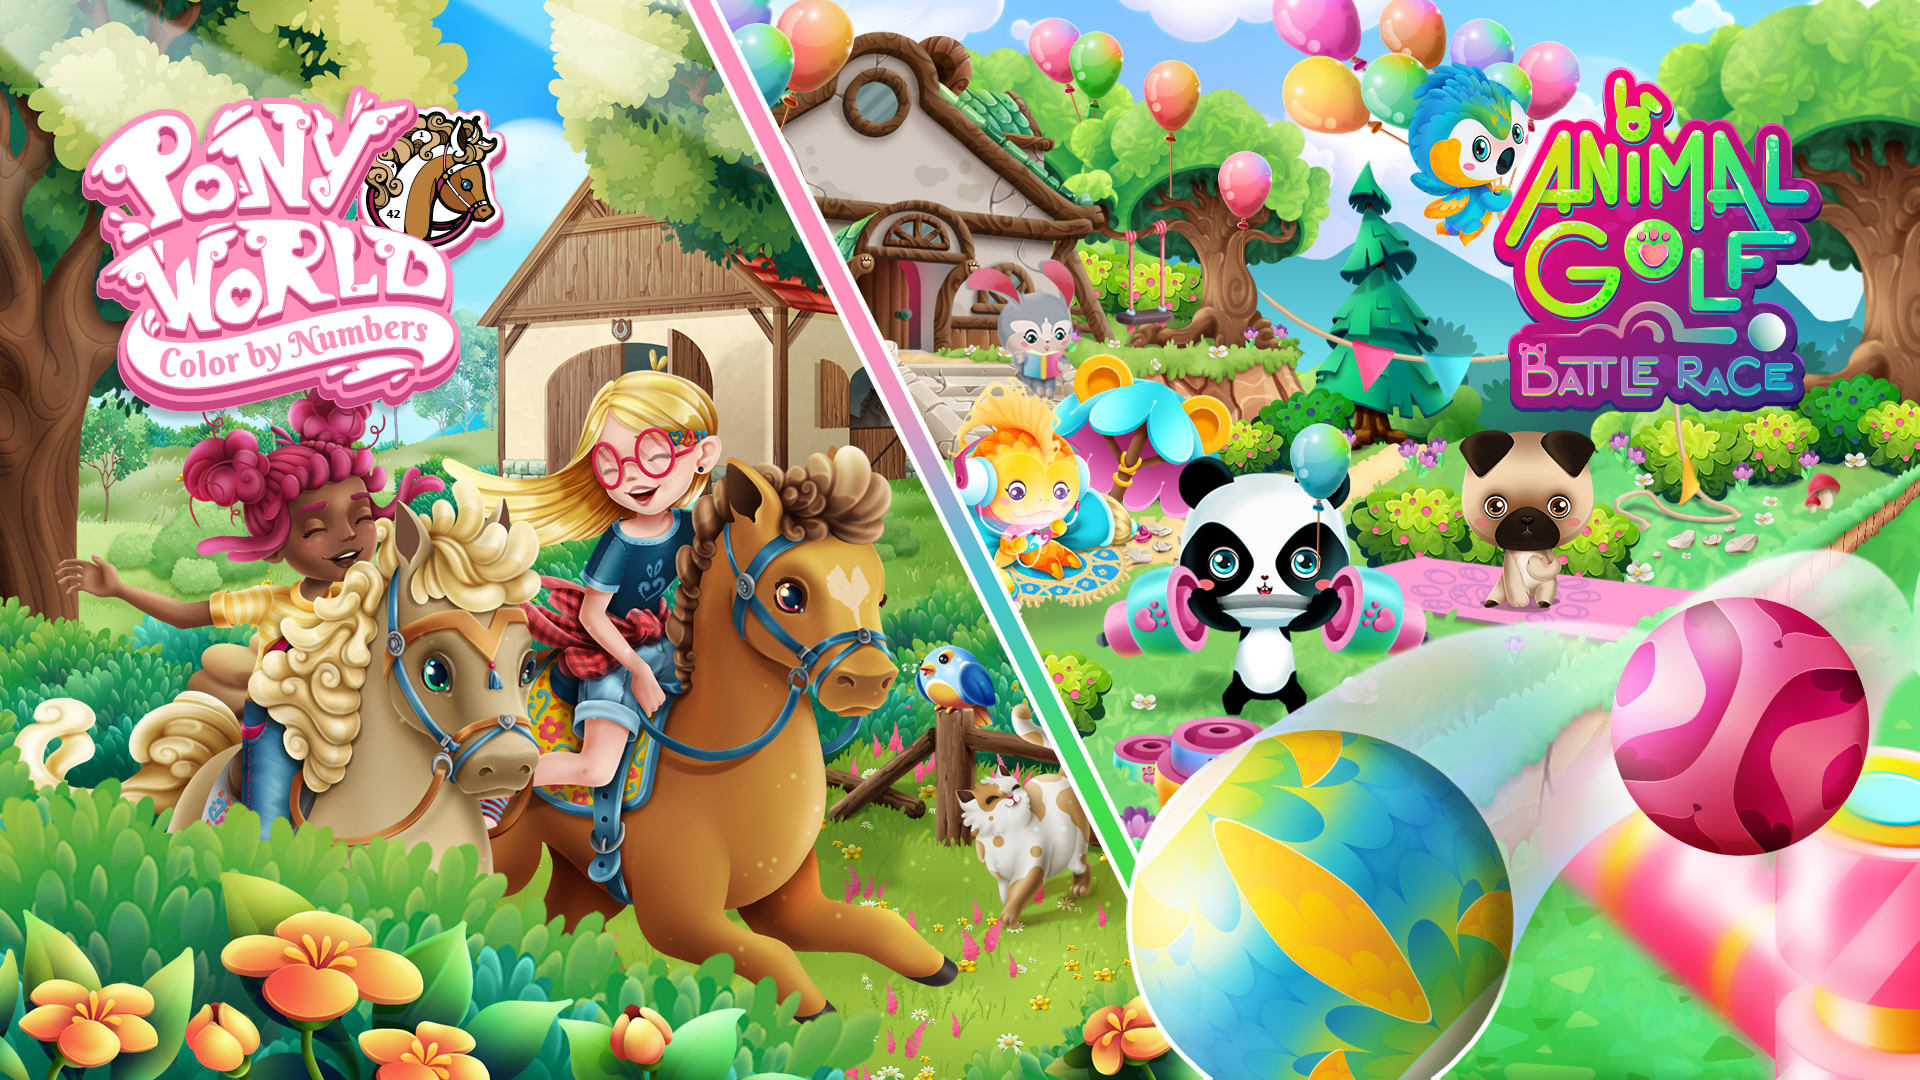 Pony World - Color by Numbers & Animal Golf - Battle Race Bundle